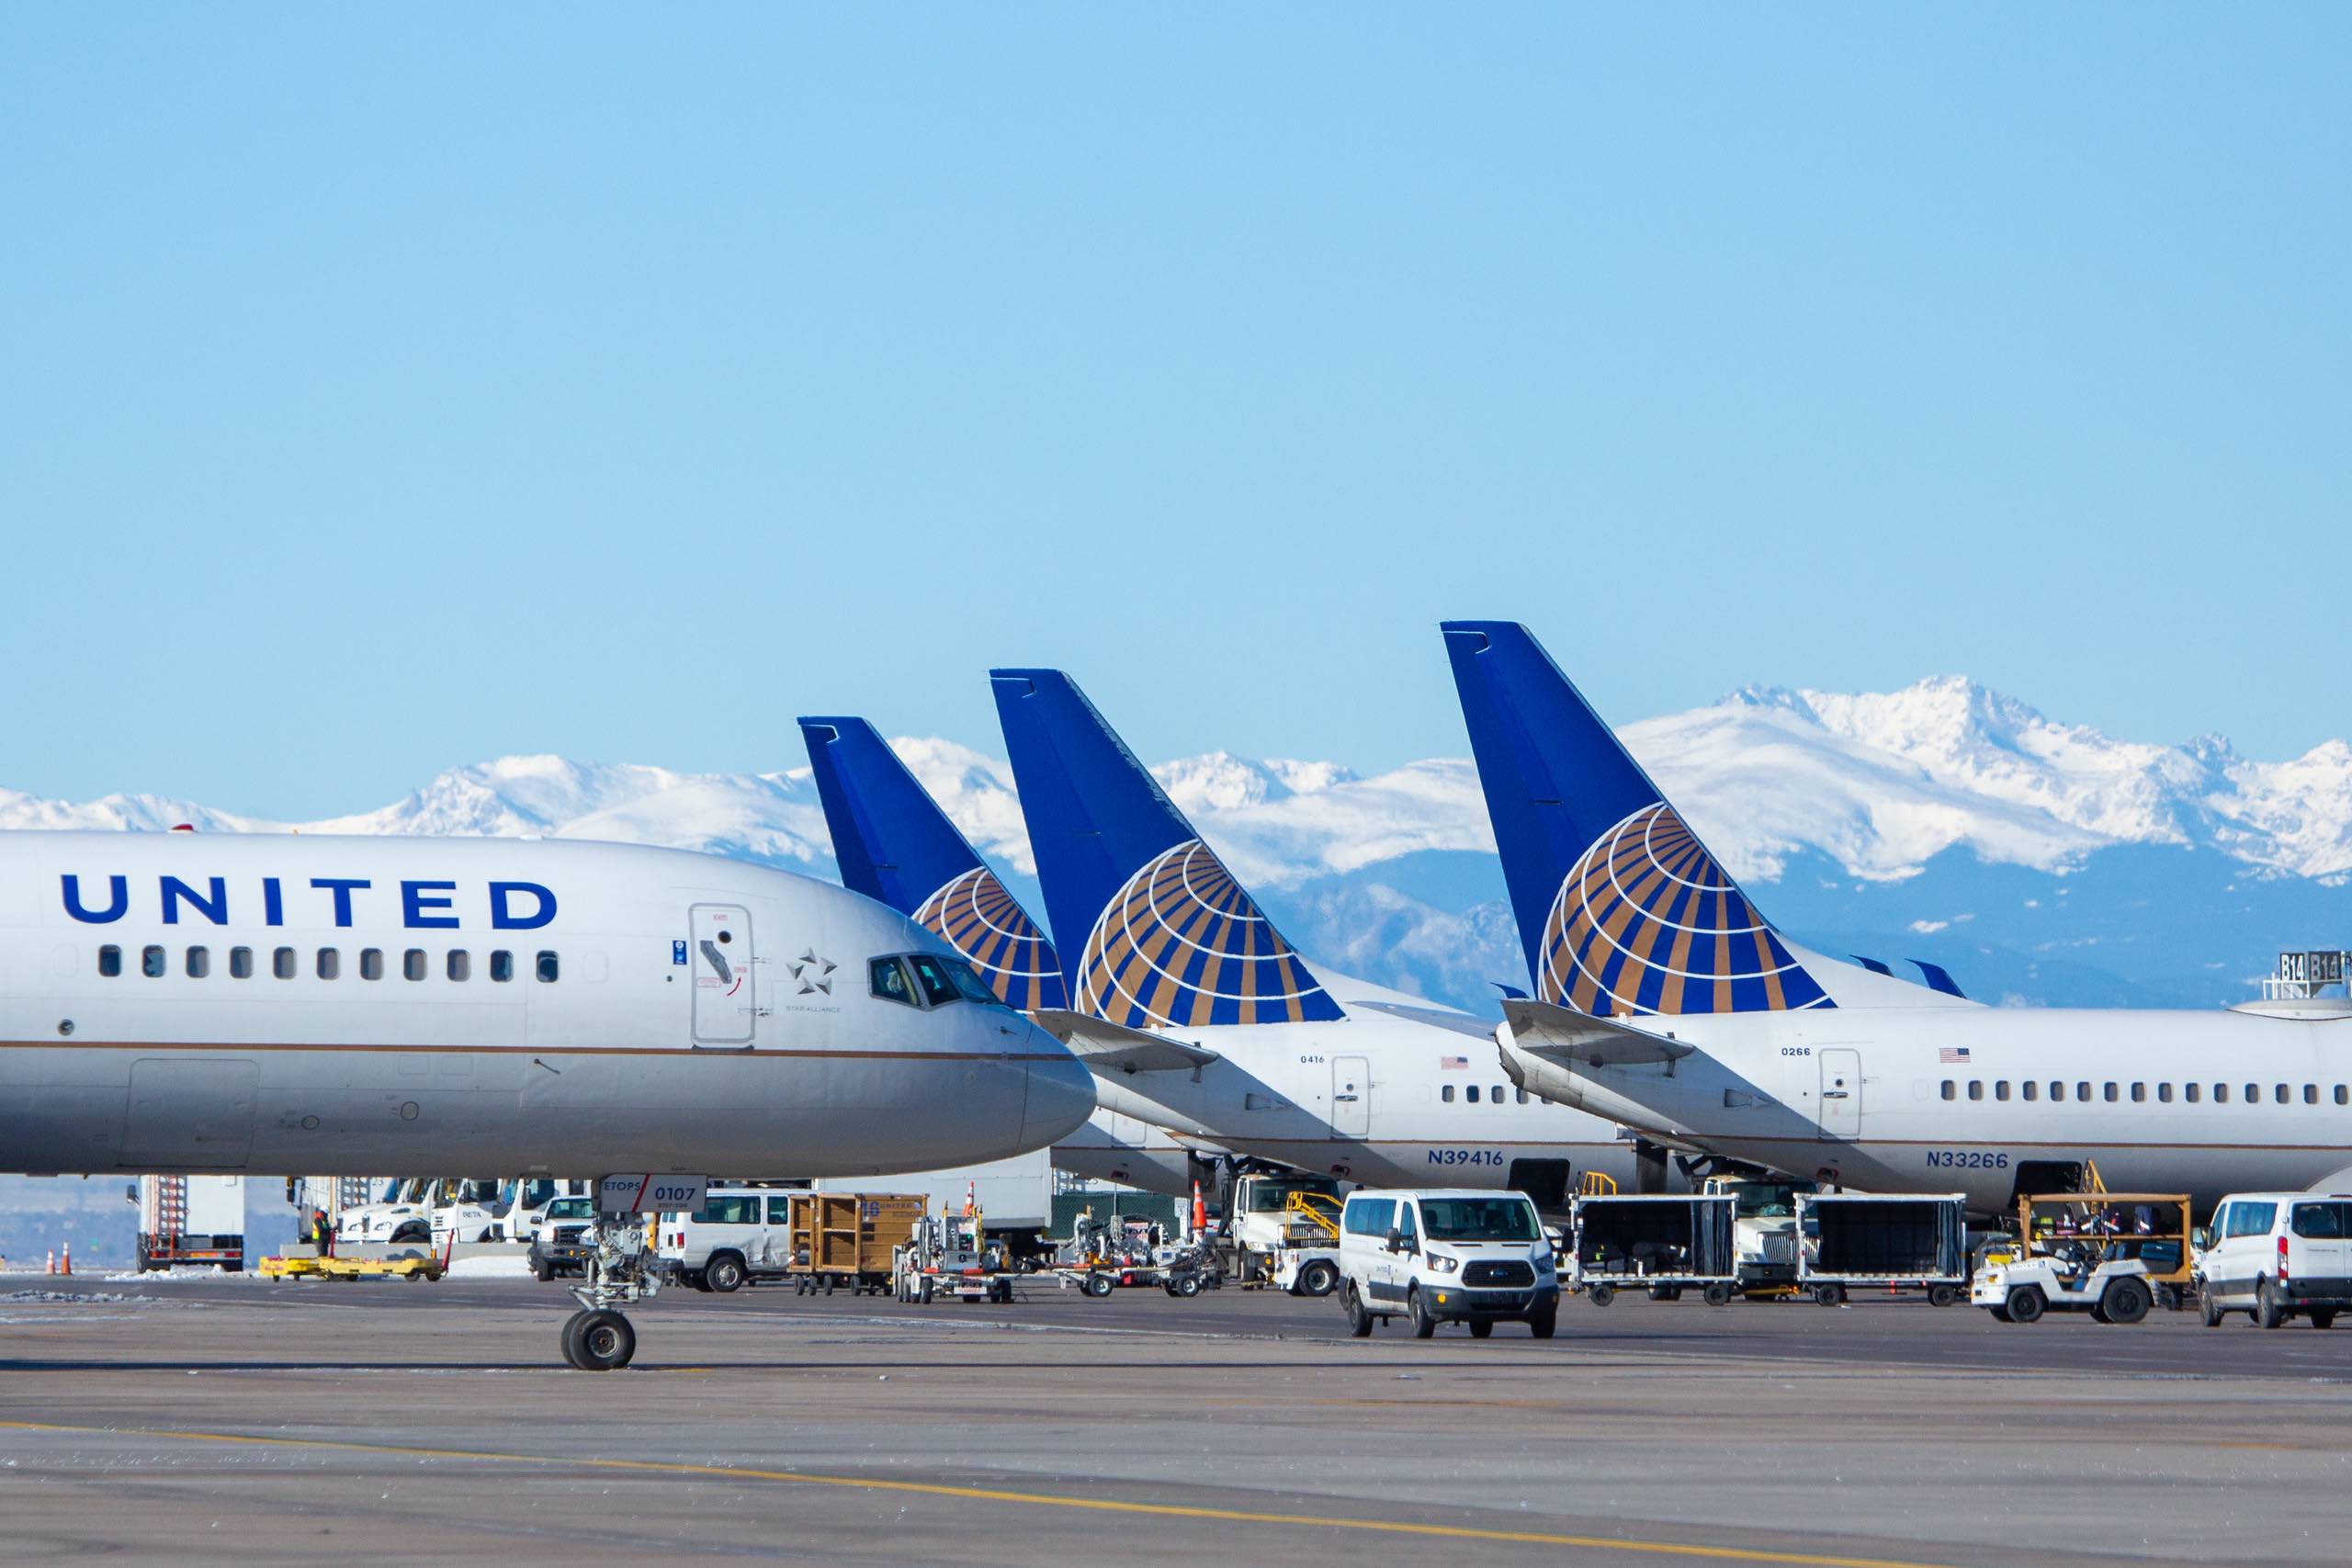 airplanes parked on a runway with mountains in the background